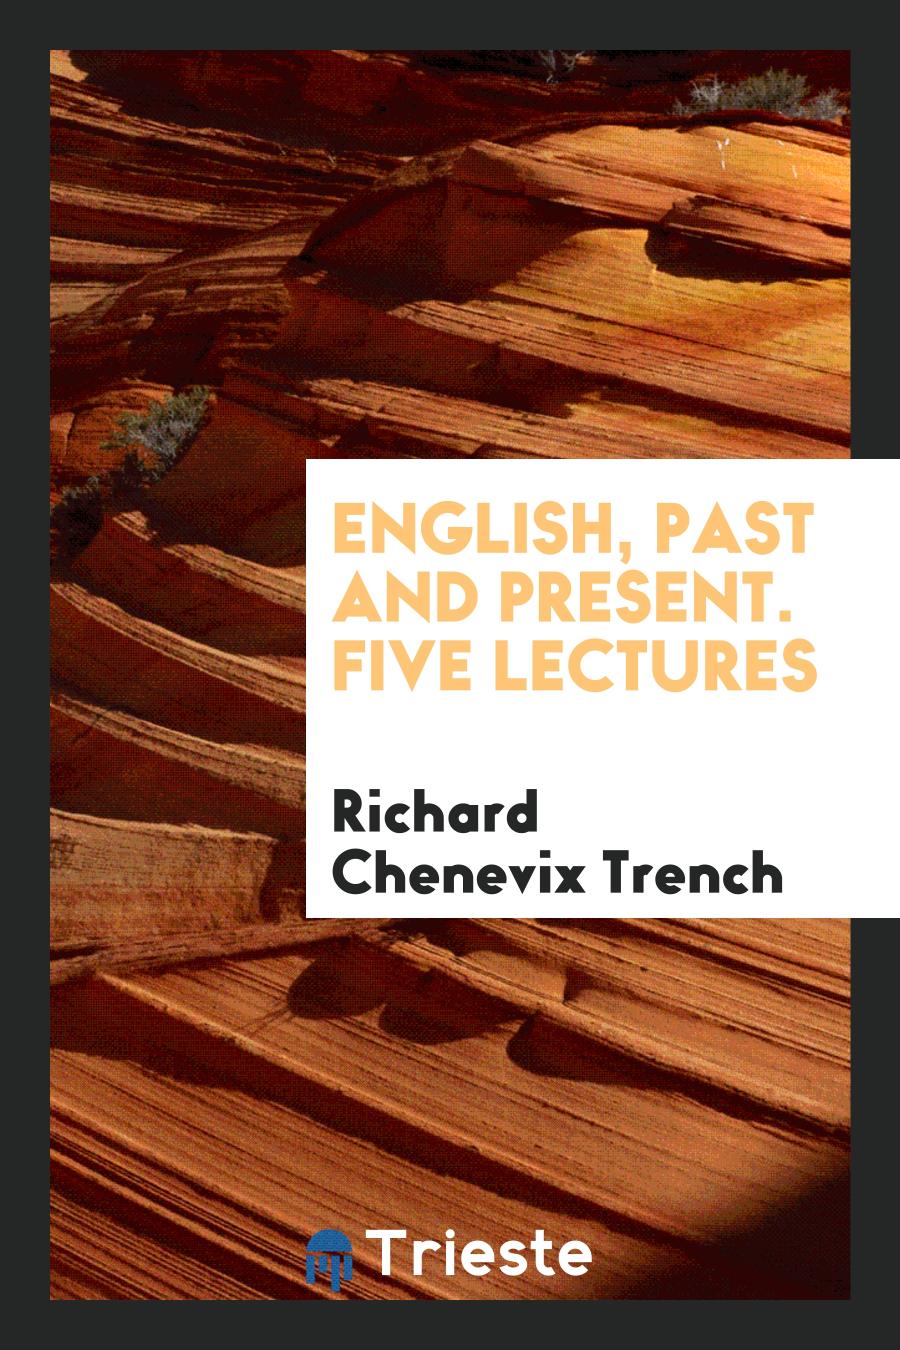 Richard Chenevix Trench - English, Past and Present. Five Lectures